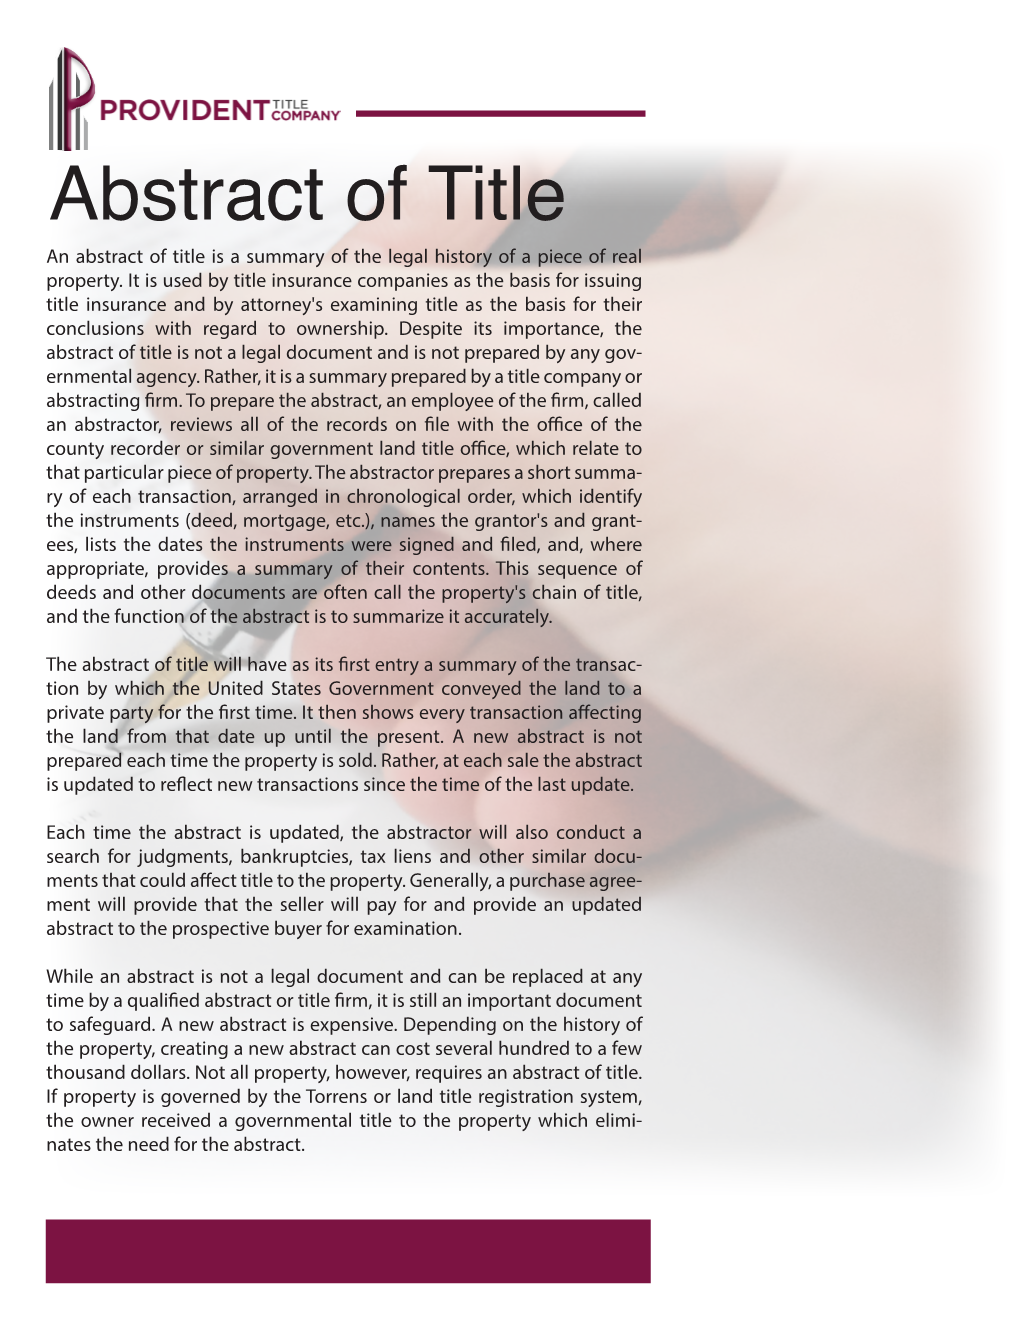 Abstract of Title an Abstract of Title Is a Summary of the Legal History of a Piece of Real Property